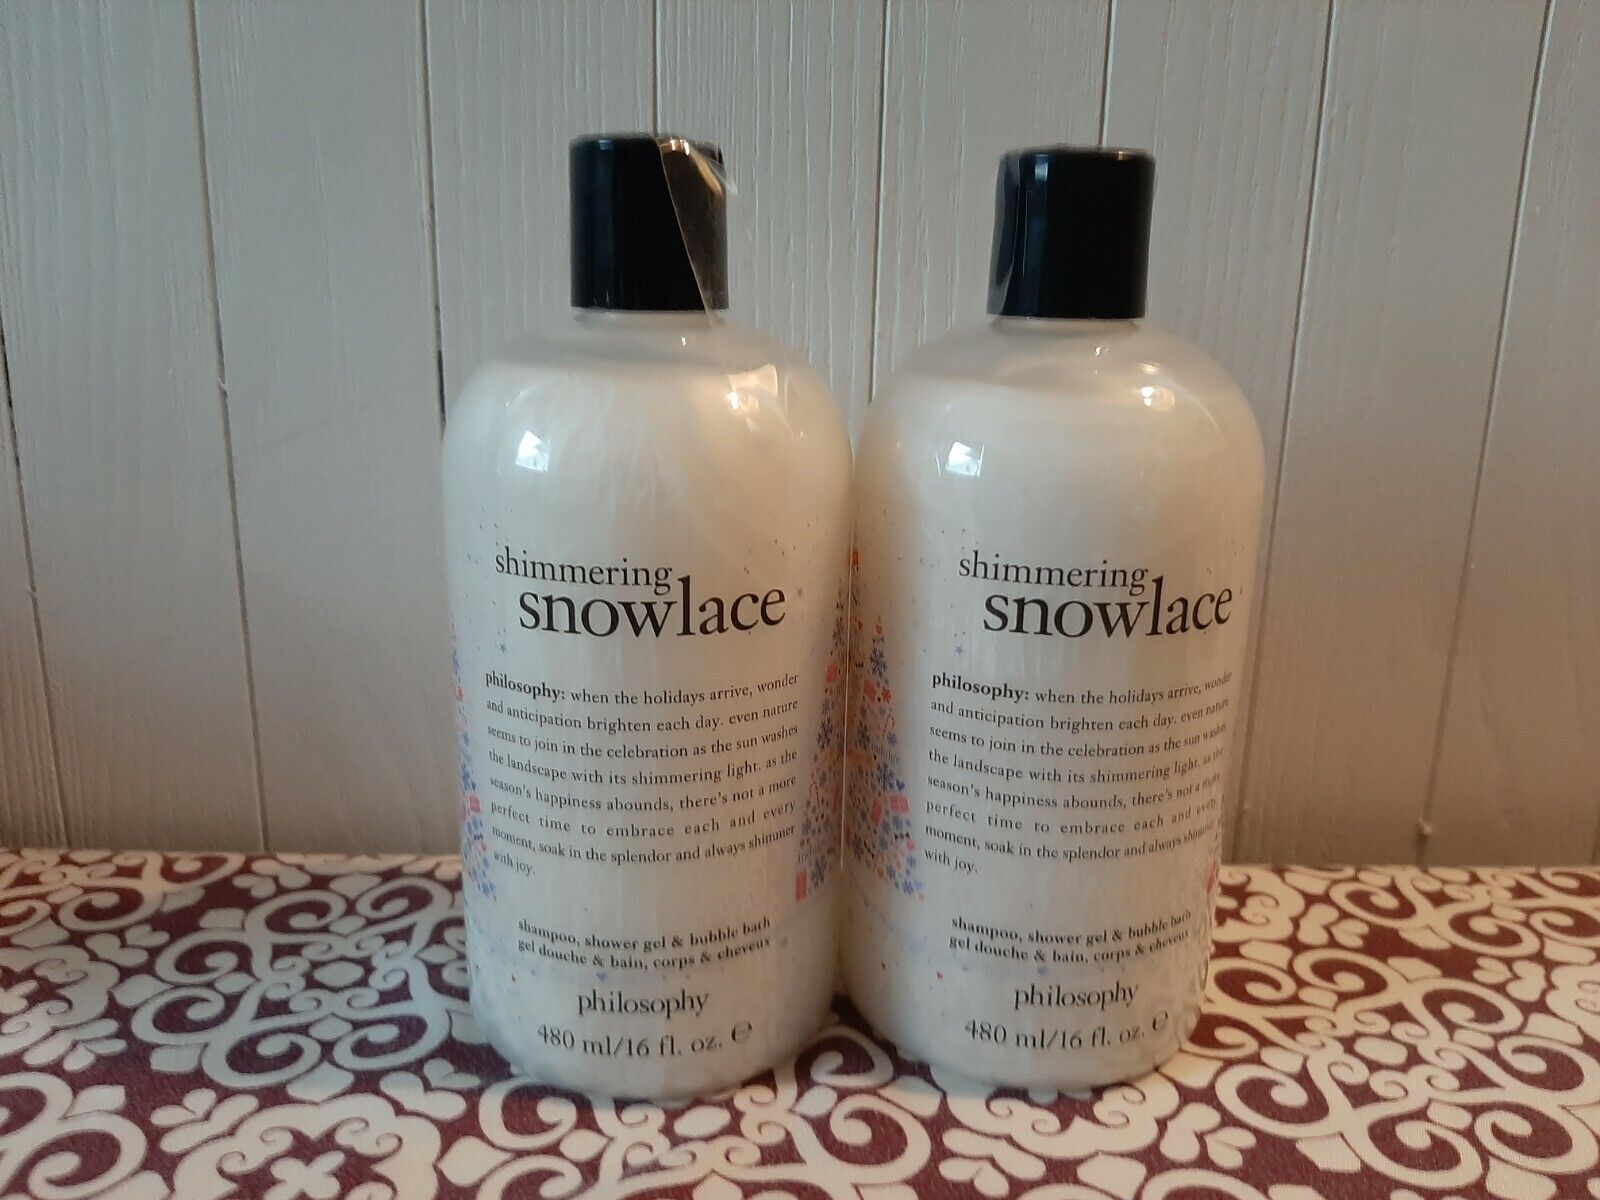 Philosophy Shimmering Snowlace Shampoo amp; 16o Duo Max 43% OFF Shower Gel Our shop OFFers the best service